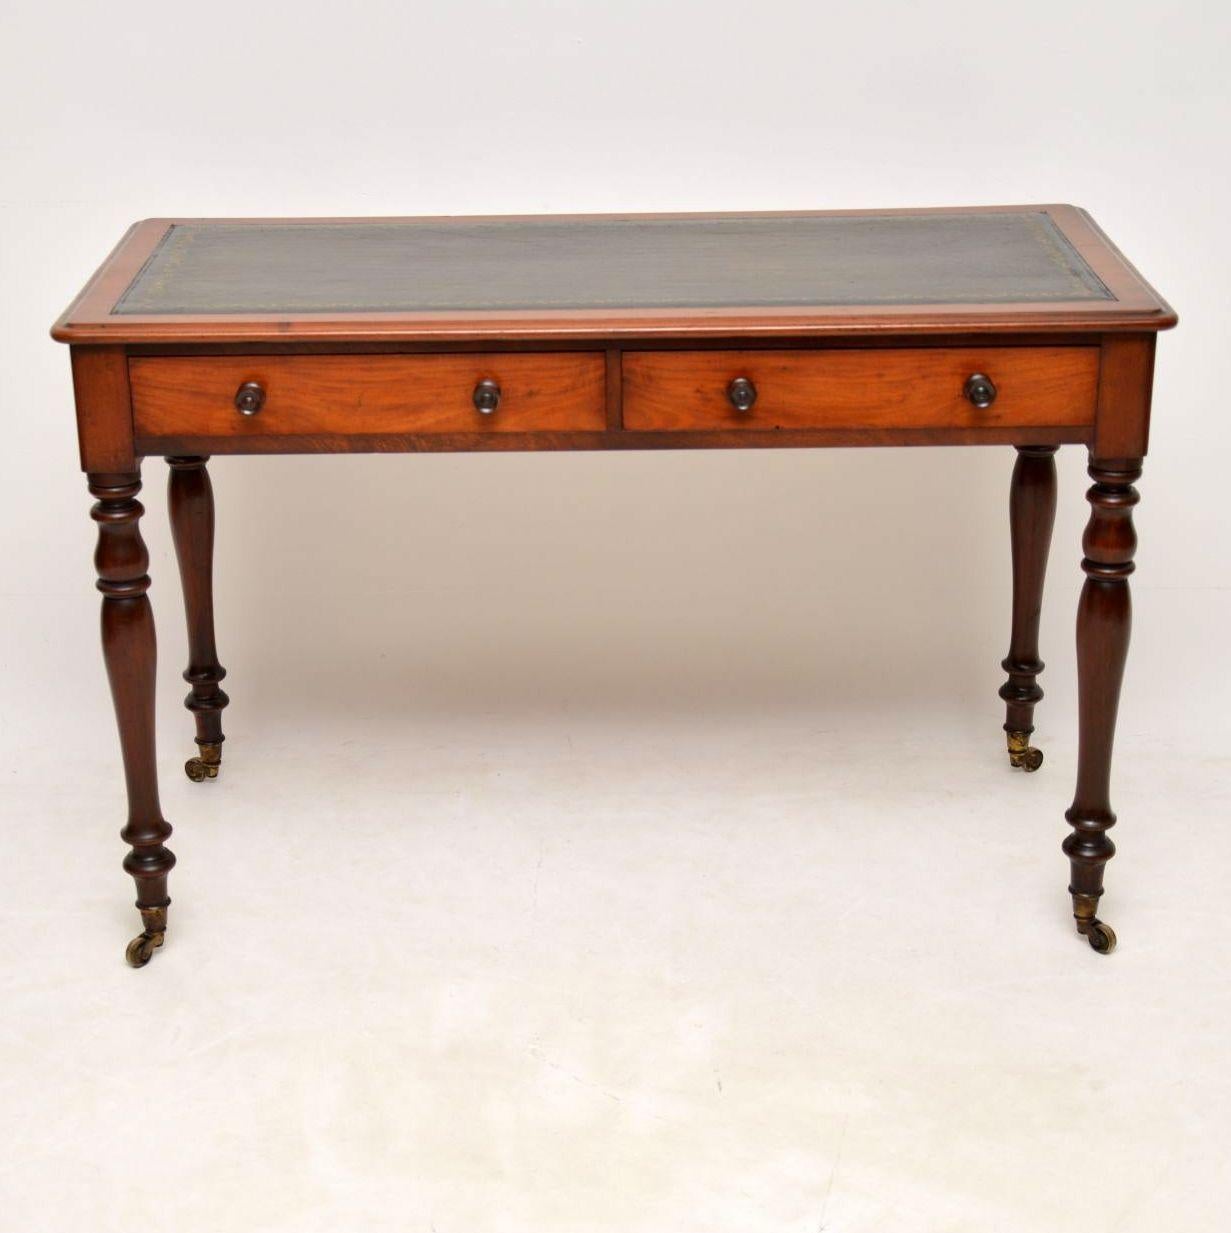 Antique early Victorian mahogany writing table with a tooled leather writing surface & dating to circa 1860s period. It’s superb quality with two drawers on the front & dummy drawers on the back, all with turned mahogany bun handles. The legs are